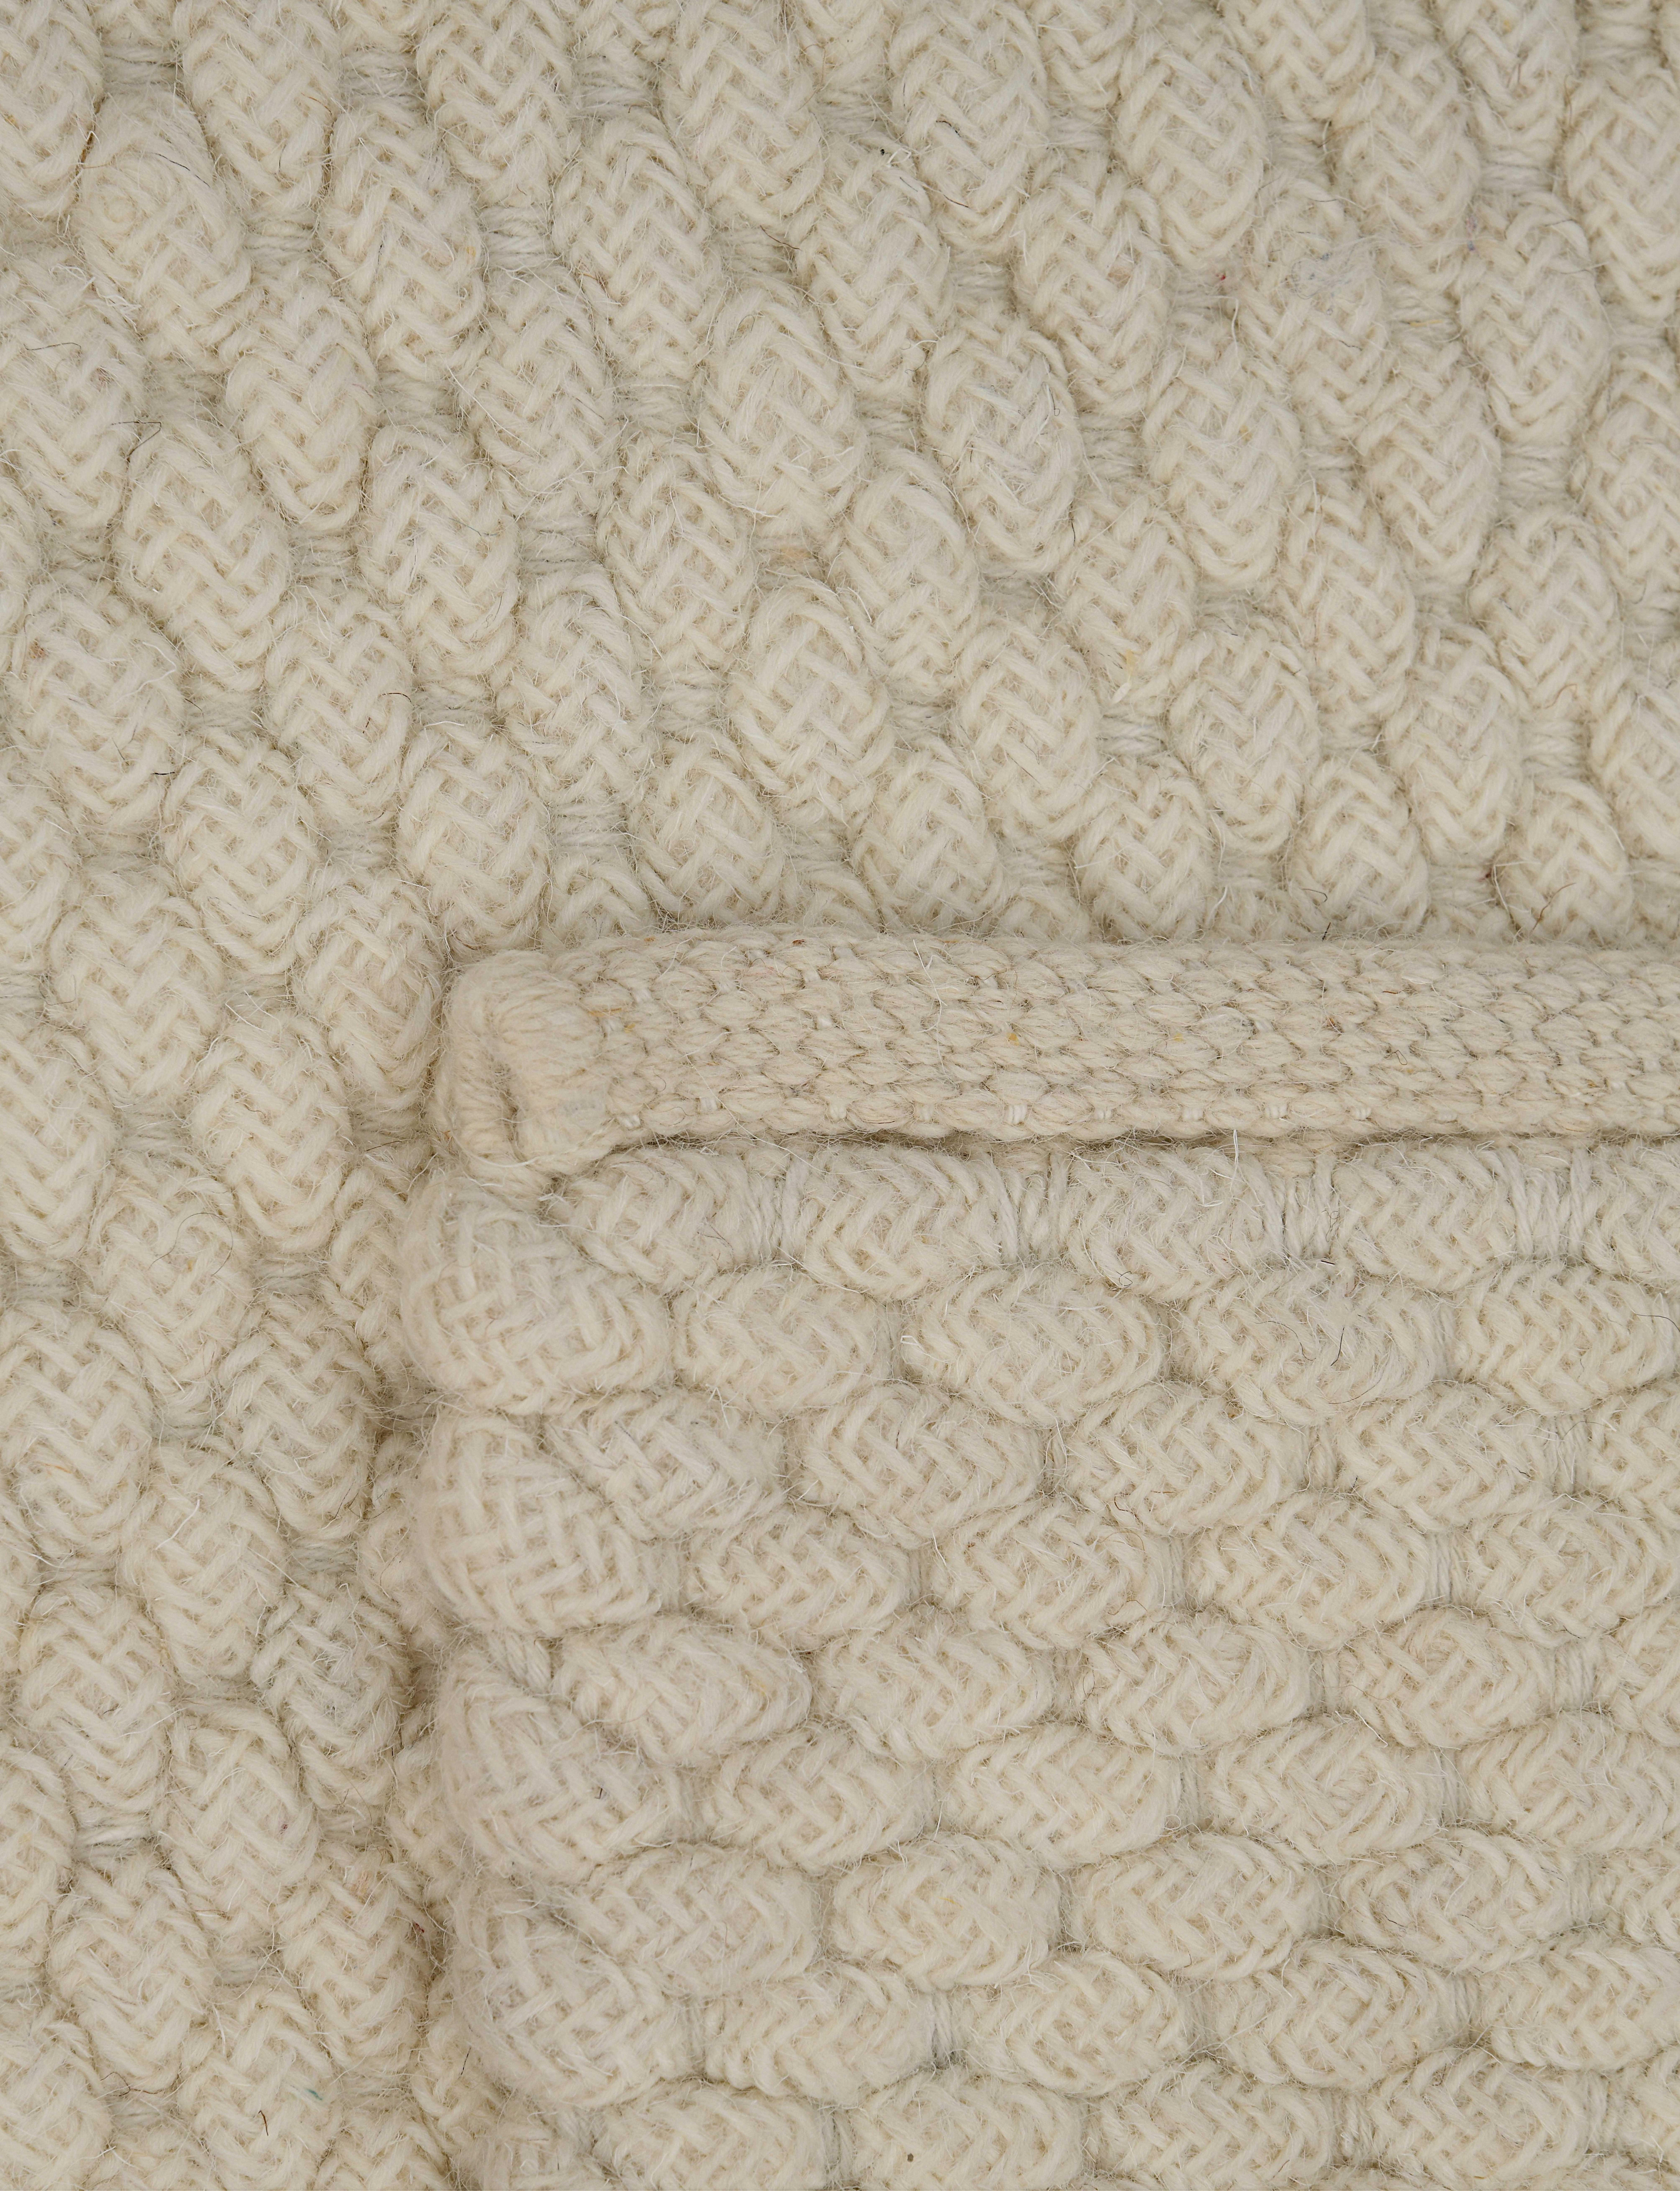 Hand-Woven Acia, Ivory, Handwoven Face: 60% Undyed NZ Wool, 40% Undyed MED Wool, 8' x 10' For Sale